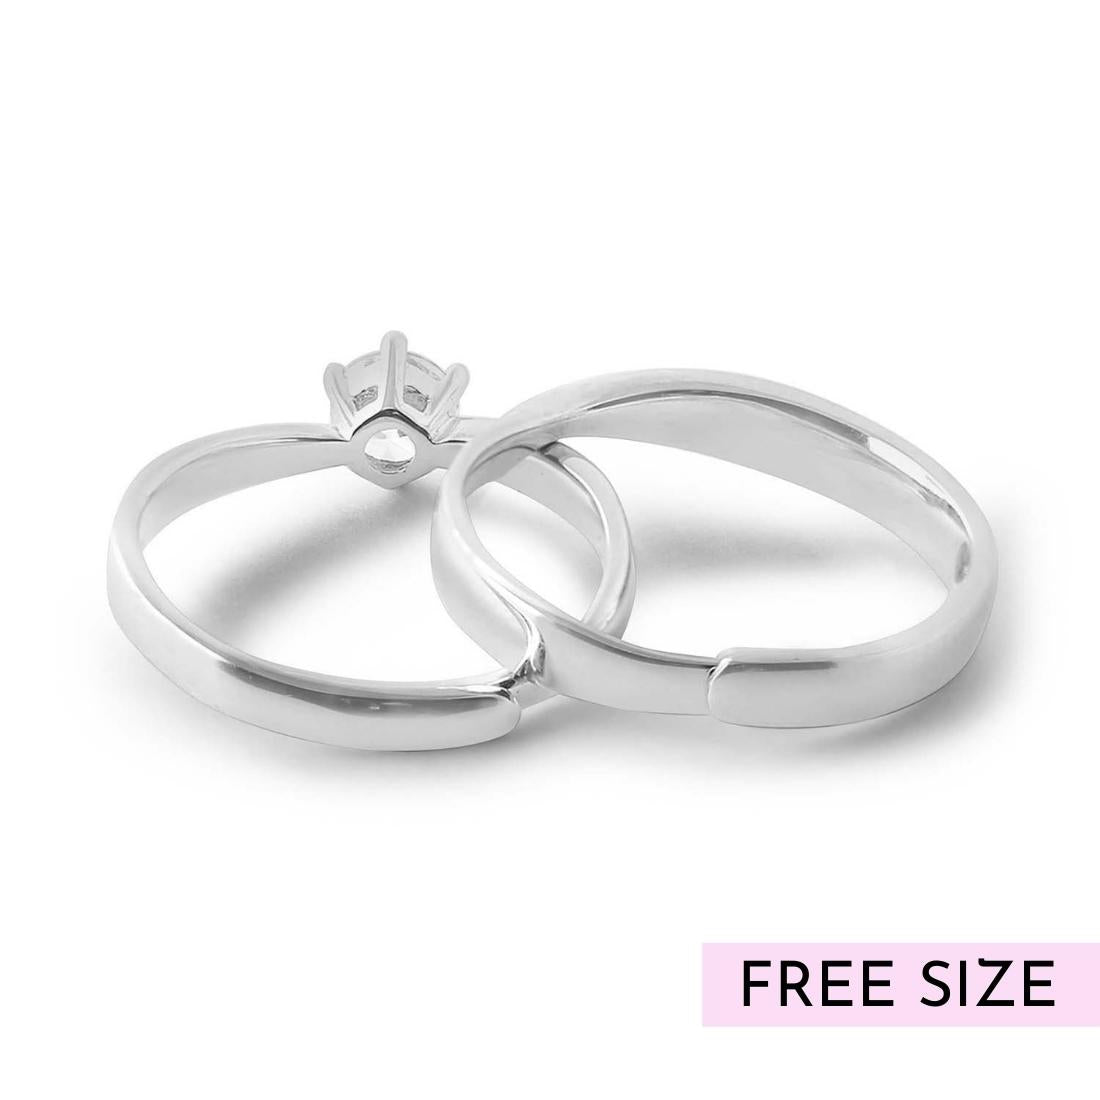 The Intertwined Couple Silver 925 Silver Ring (Adjustable)